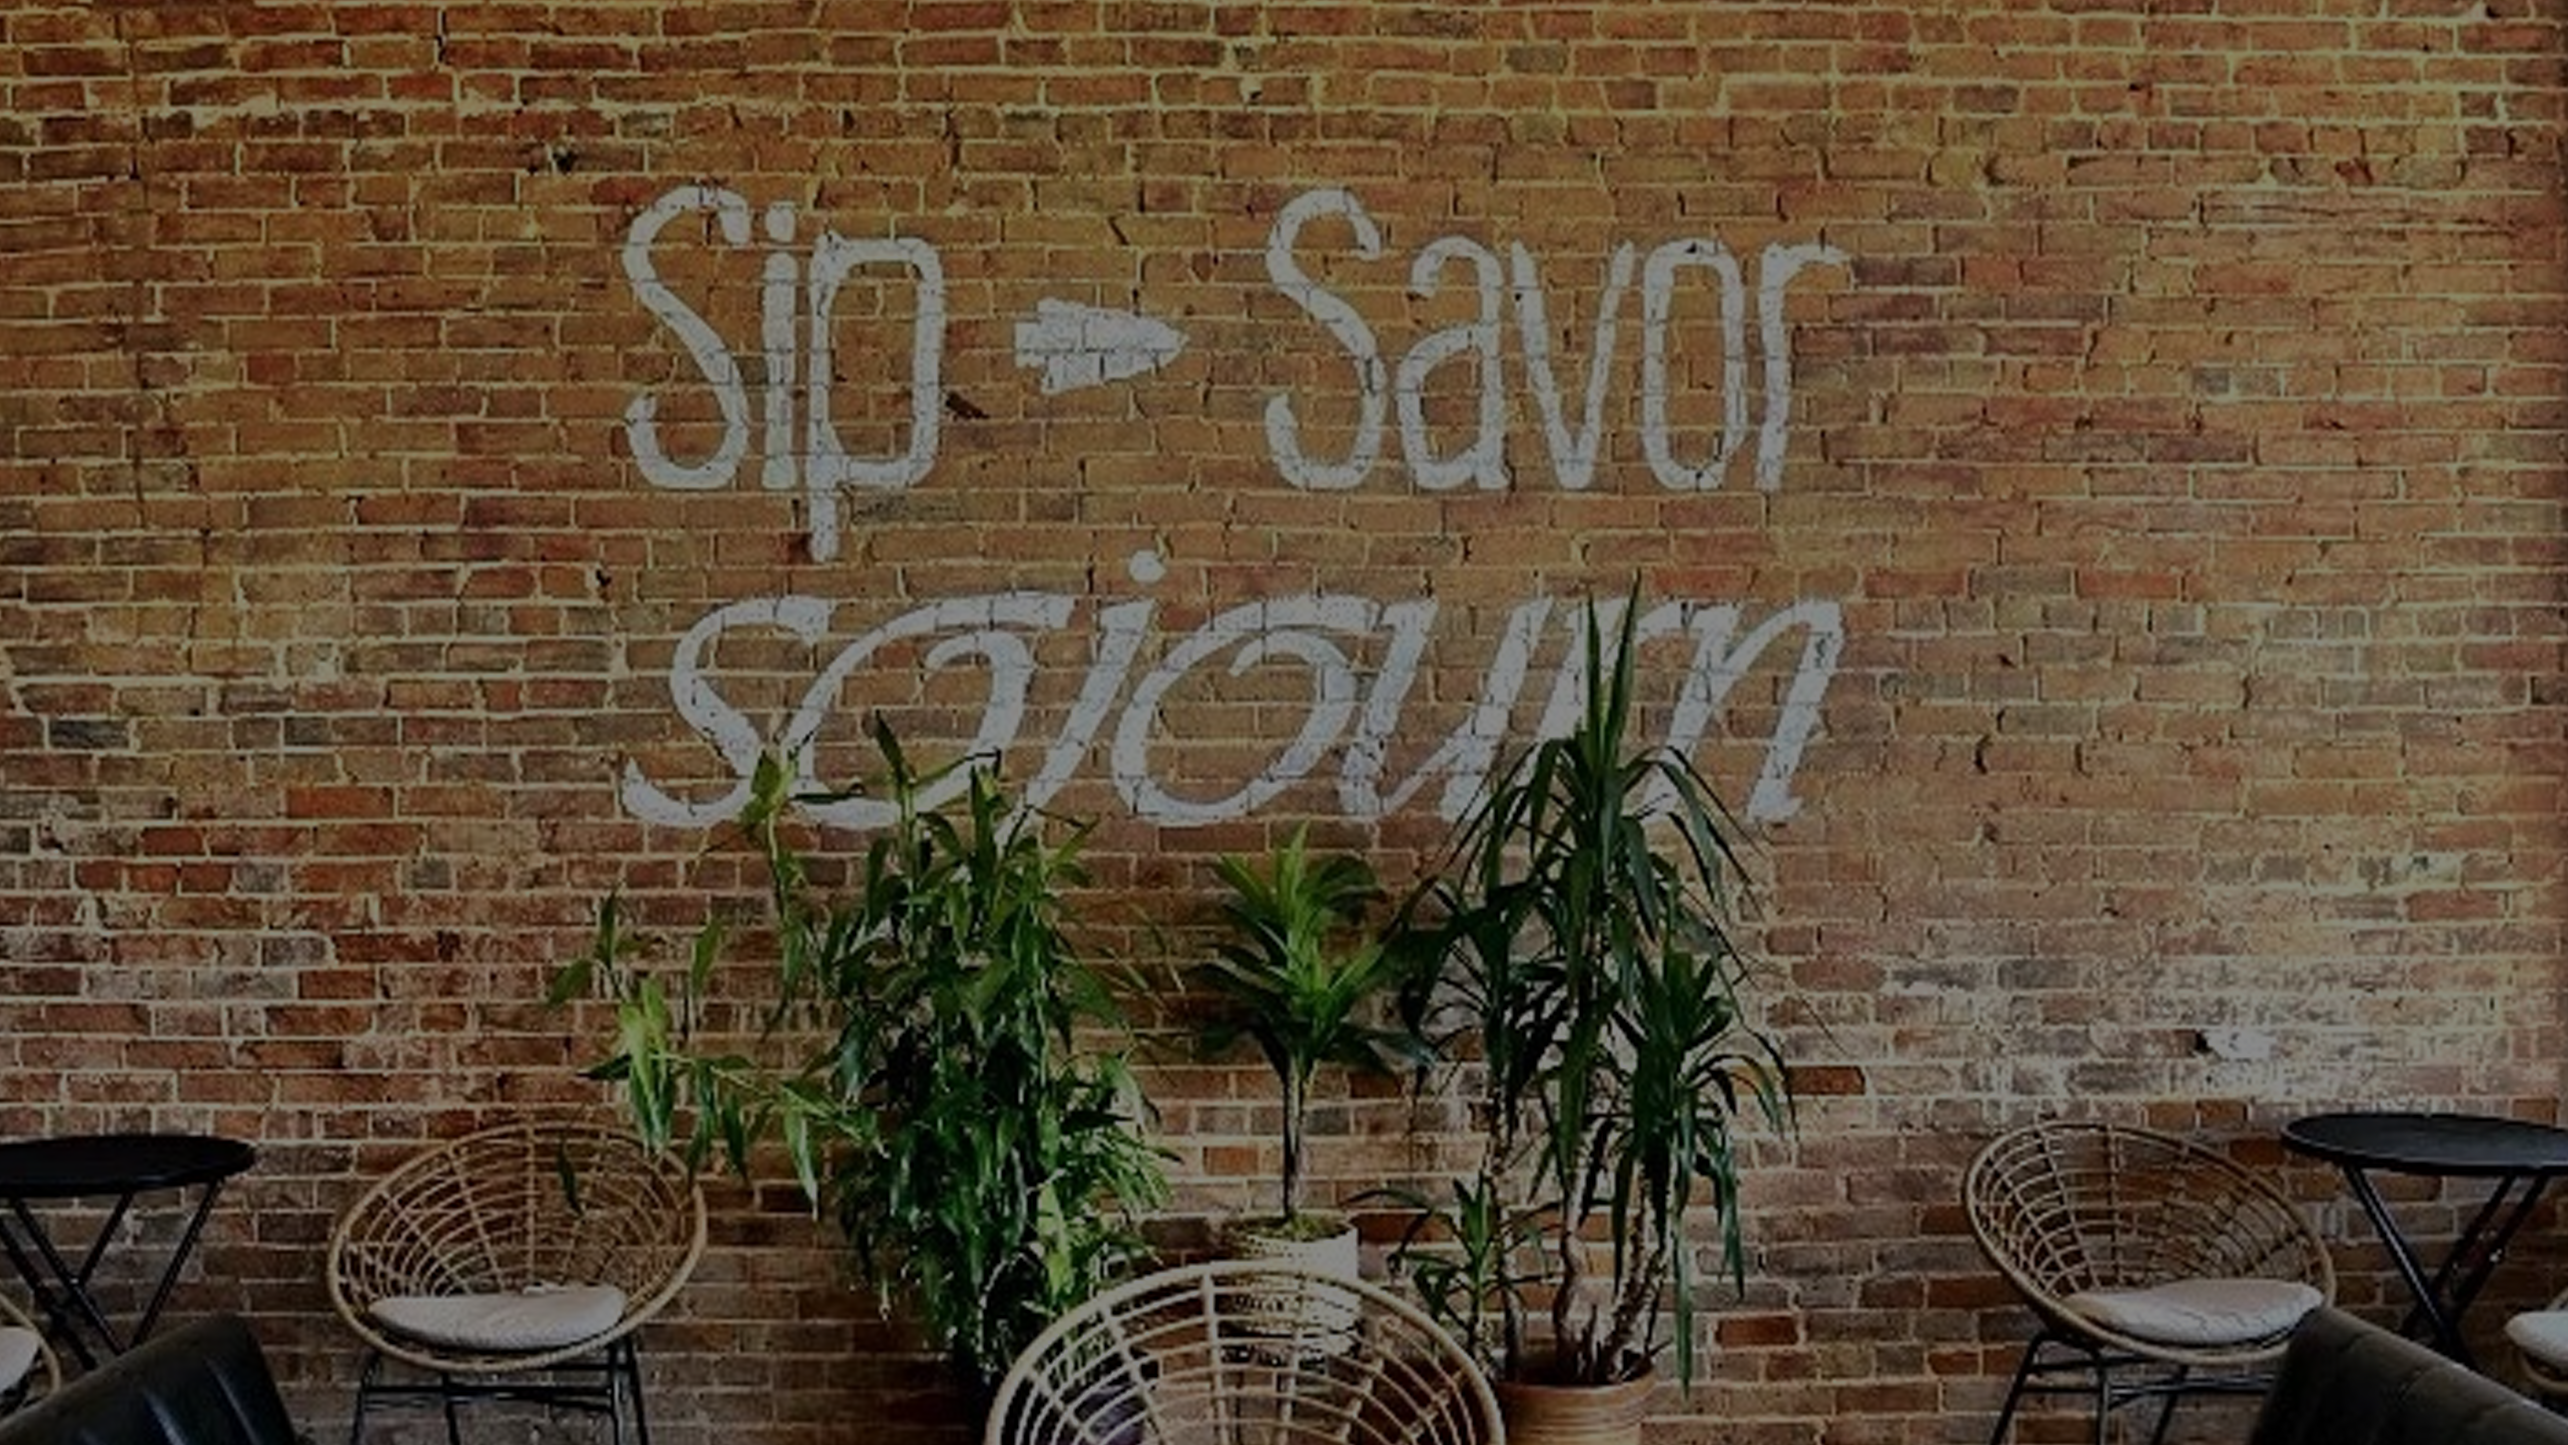 Sip Savor Sojourn on the brick wall at Rapp's Barren Brewing Company in Mountain Home, Arkansas, darkened for a website header image.